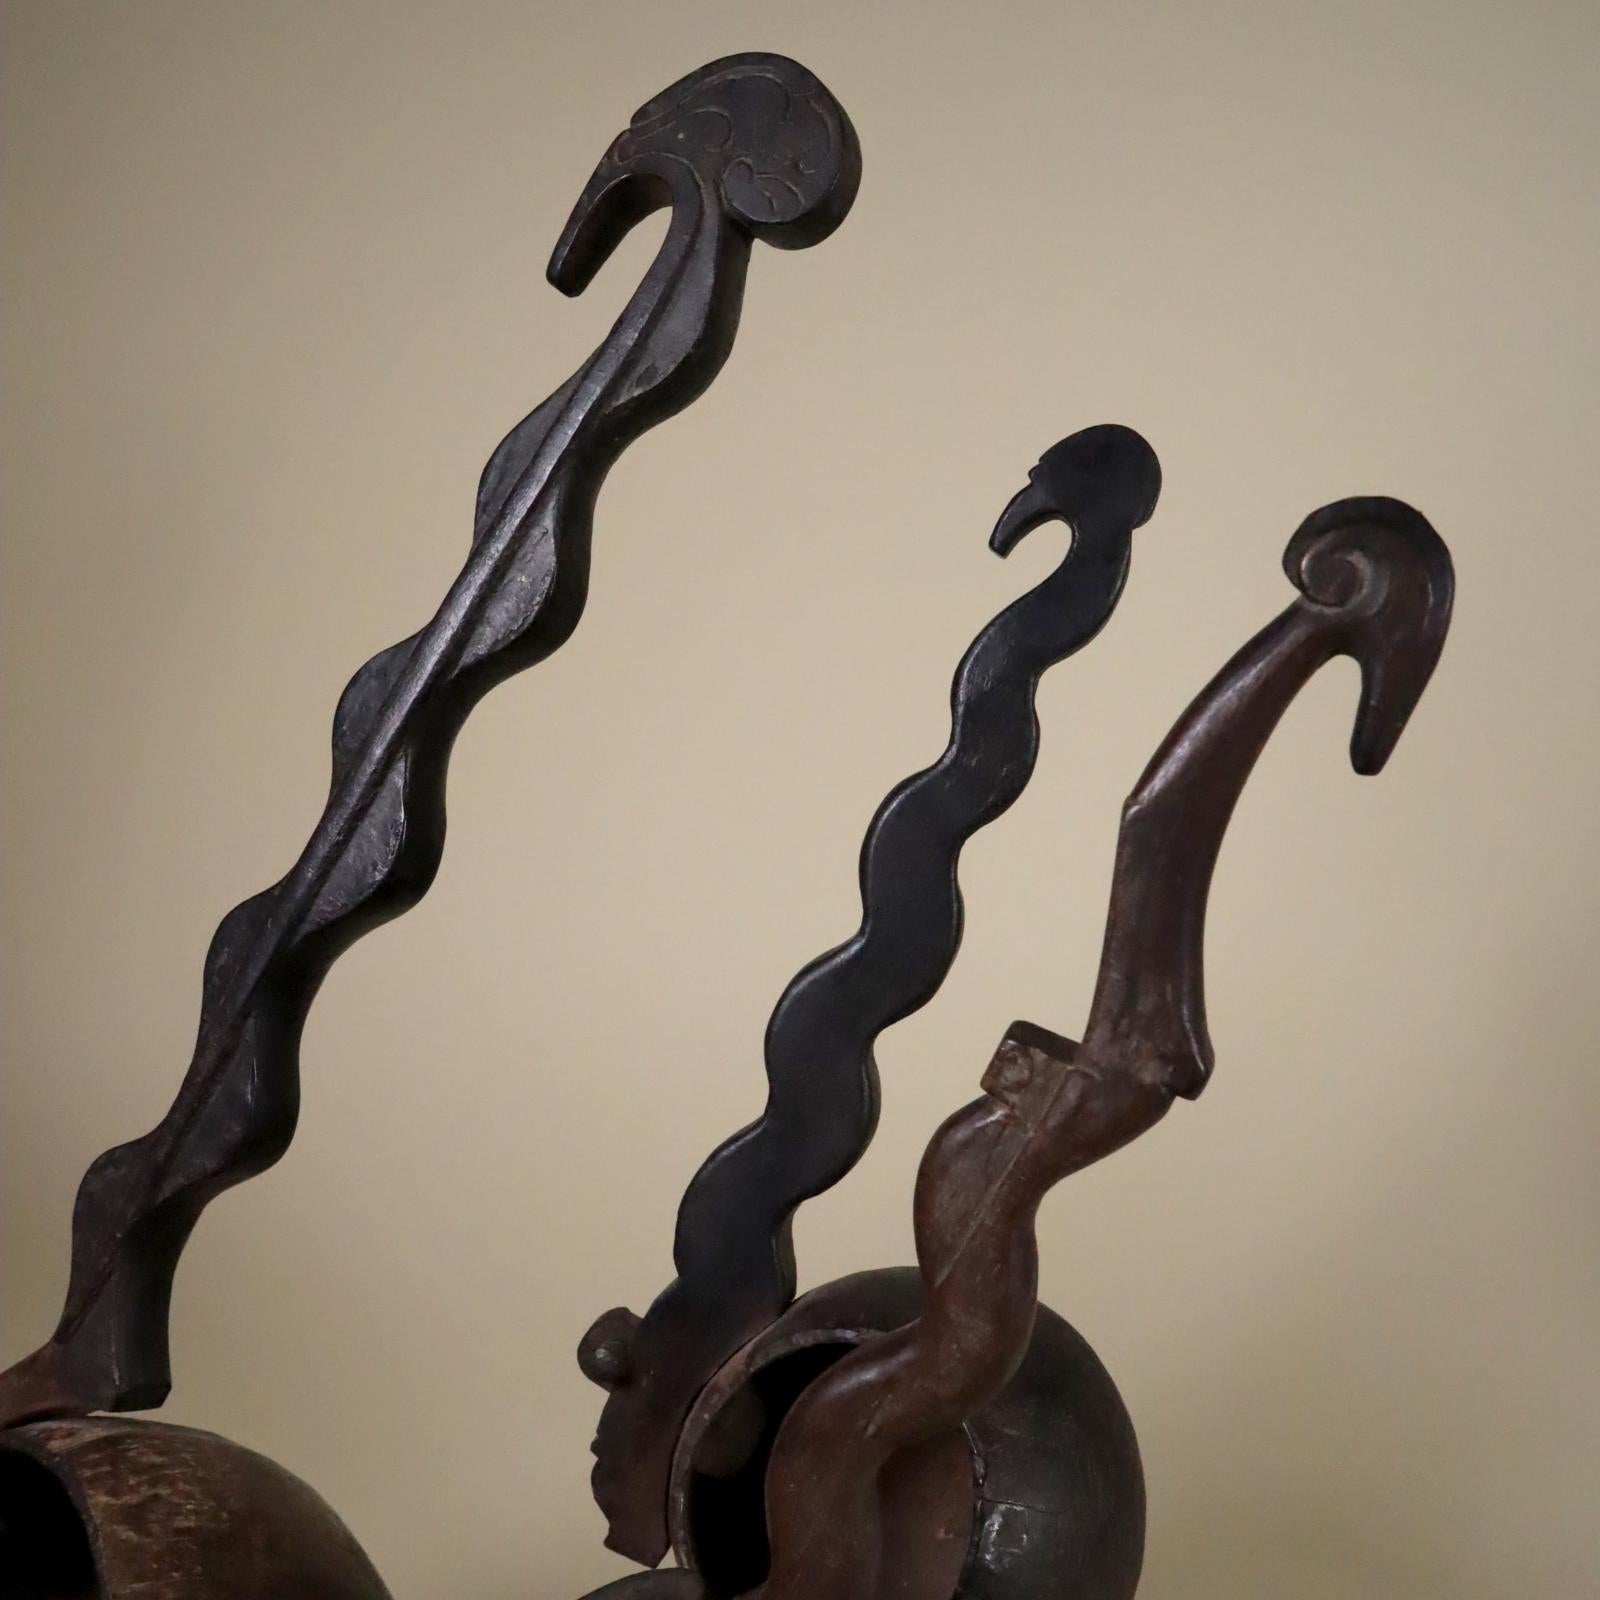 Store closing March 31. Last chance clearance sale.  Three elegant ceremonial holy water dippers. Serpentine, bird-headed wood handles with coconut bowls; the head of the handles are lightly incised with volutes. From Indonesia, not sure where,